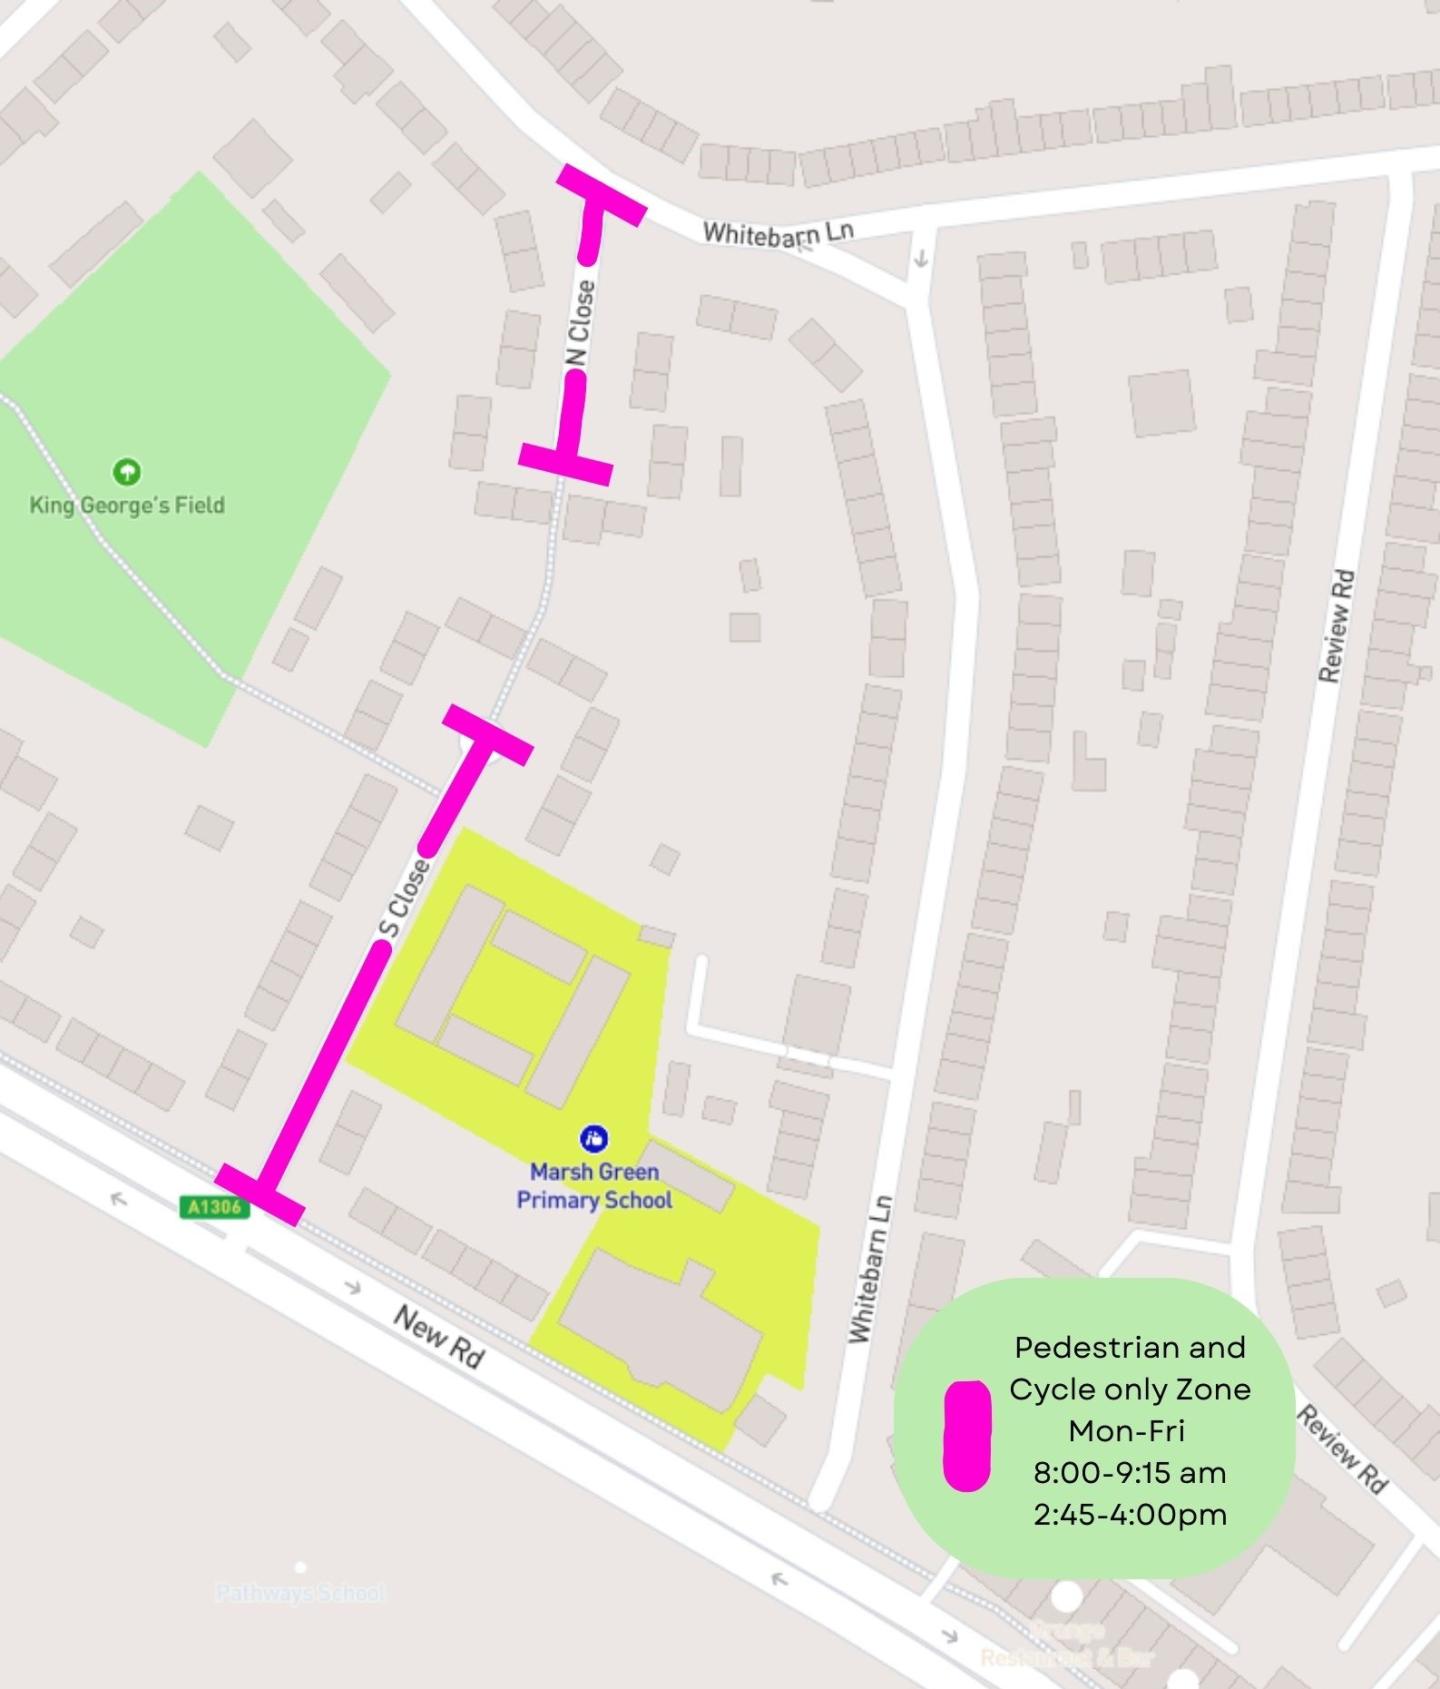 A map showing the location of the School Street for Marsh Green Primary